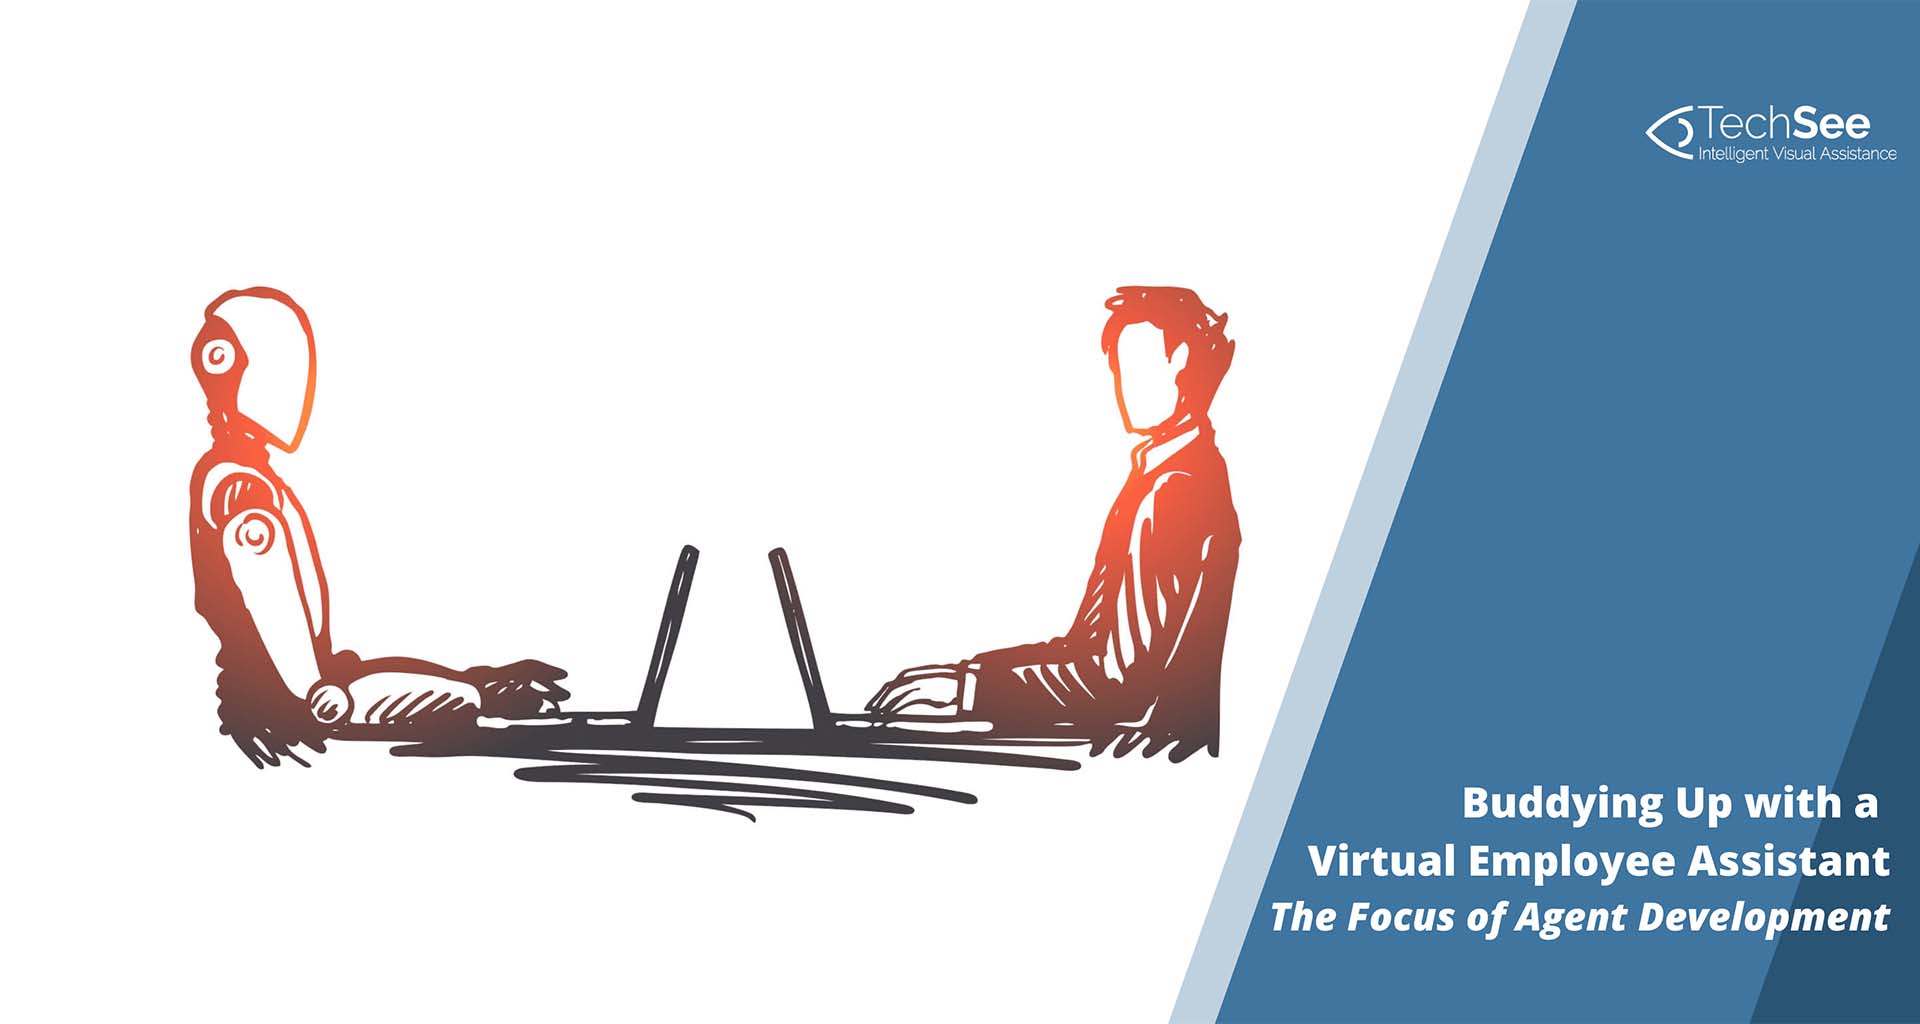 Buddying Up with a Virtual Employee Assistant: The Focus of Agent Development